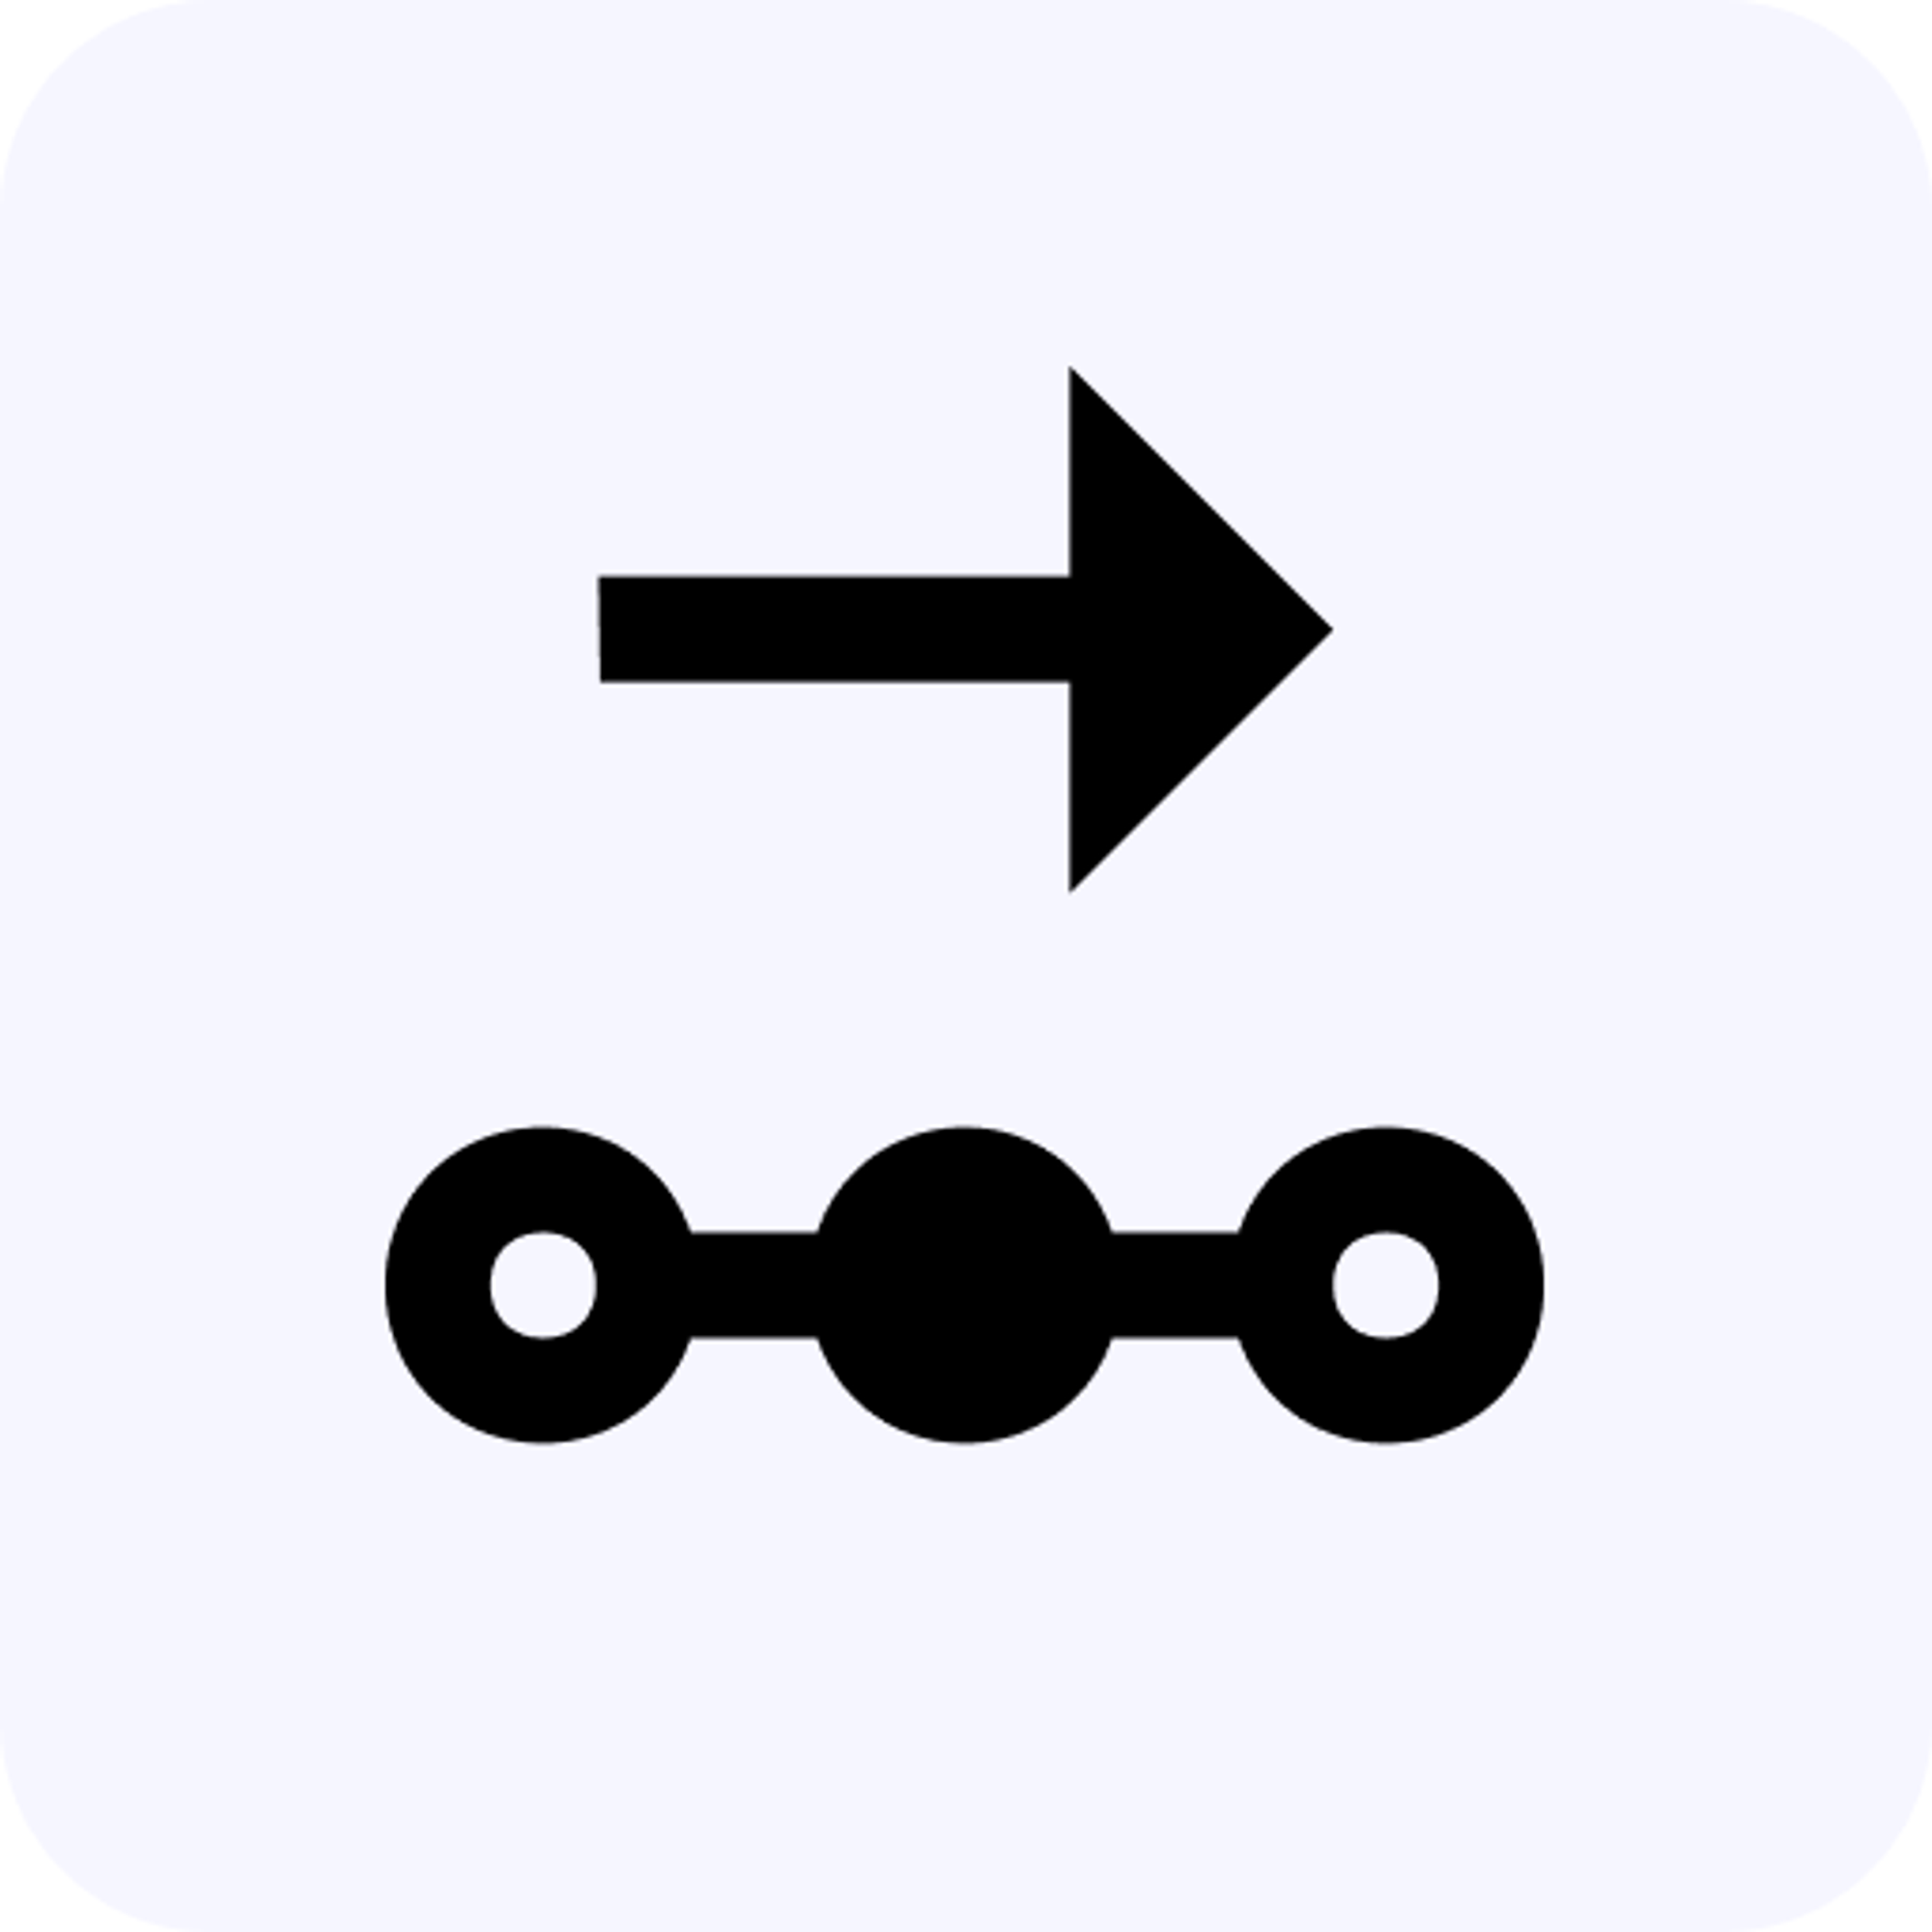 Allow one-way synchronizations